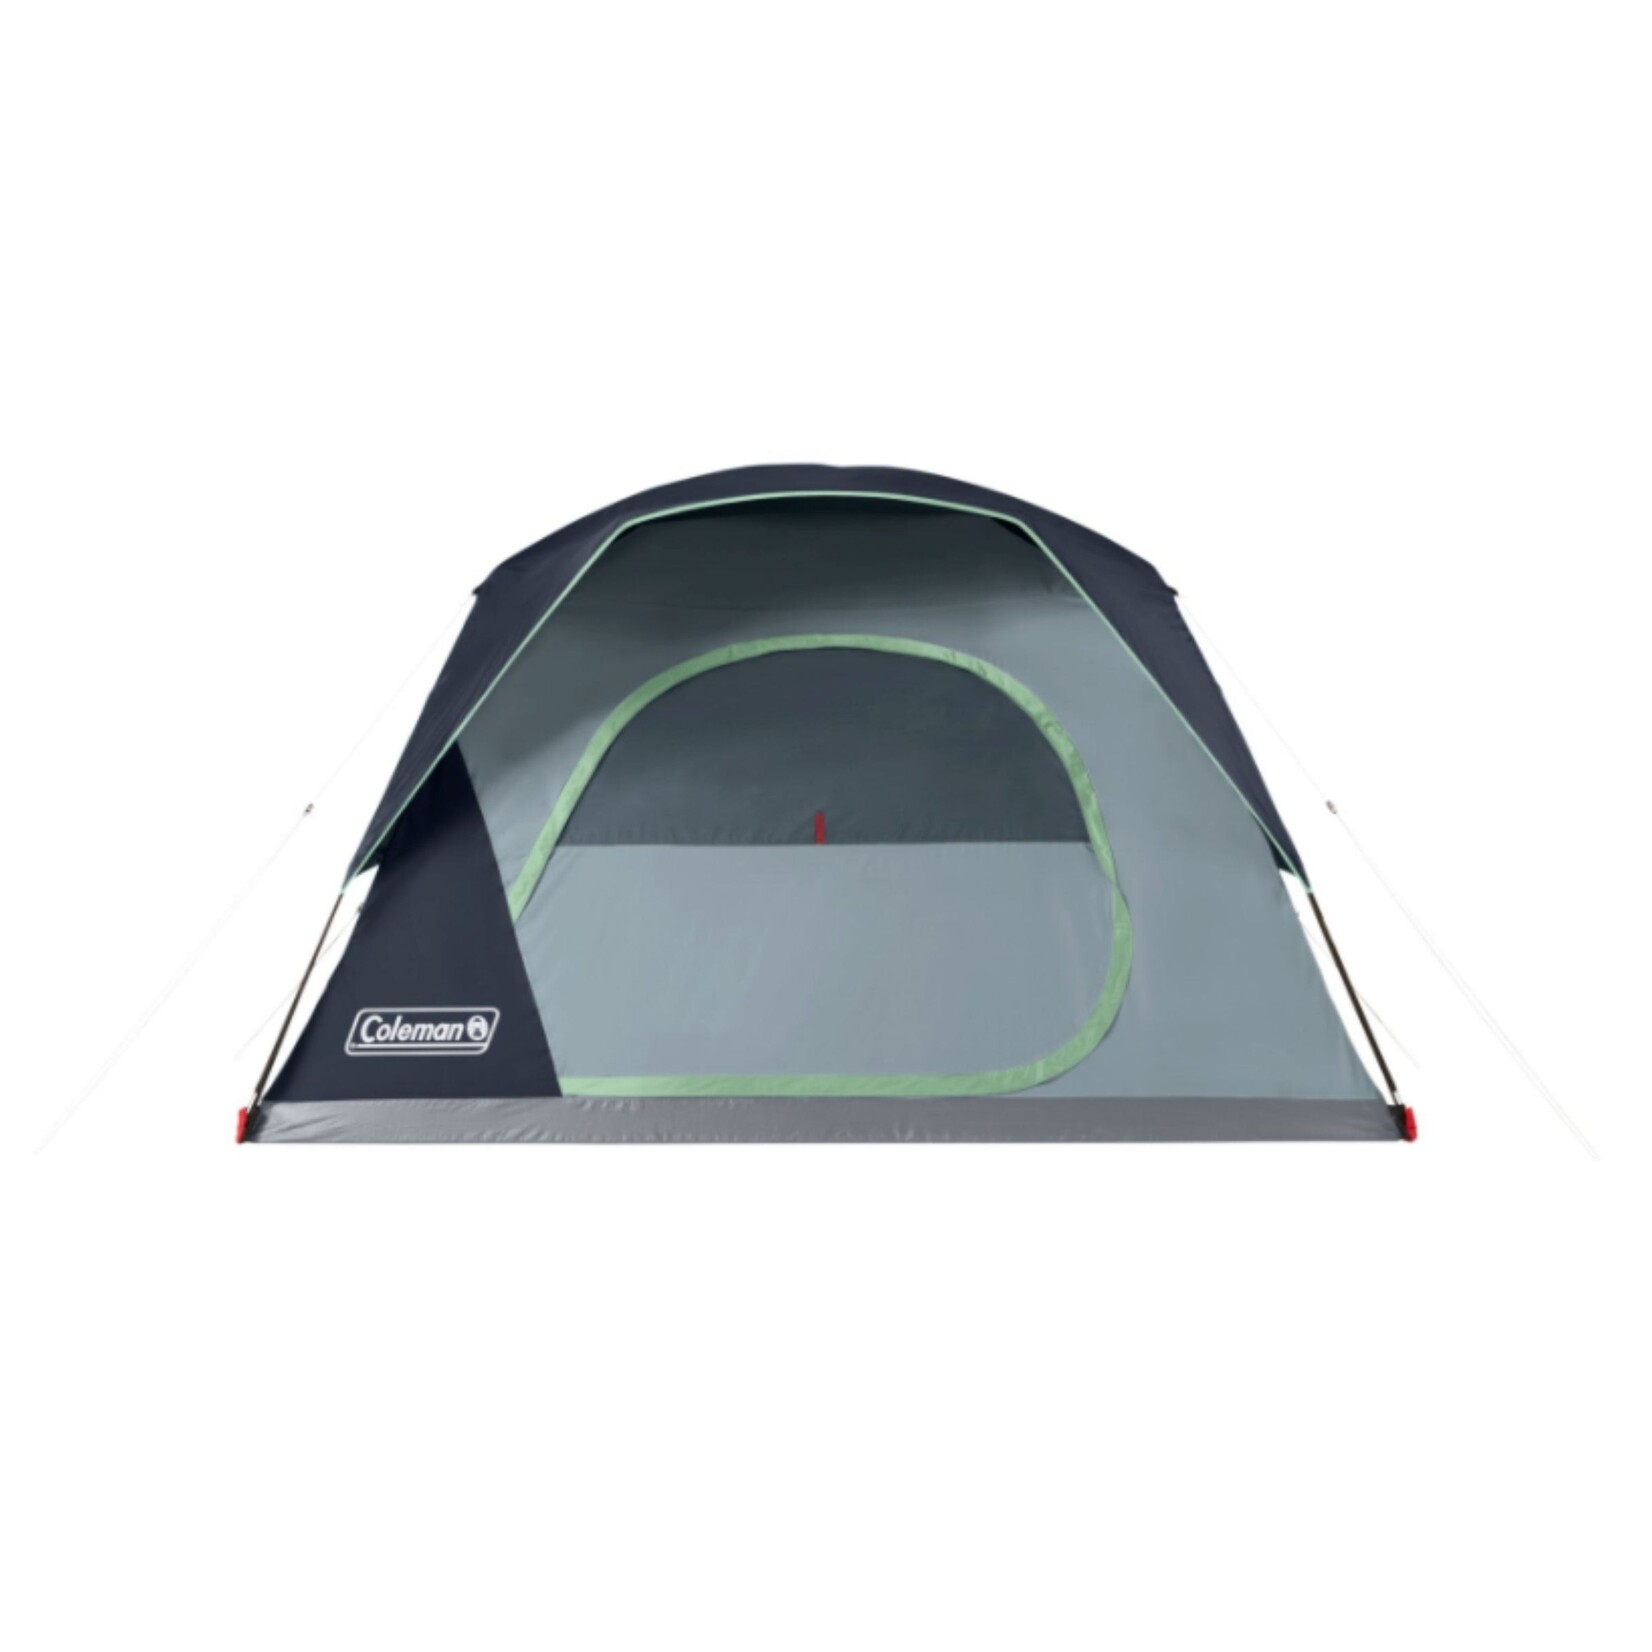 COLEMAN Tente Coleman Skydome Full Fly 6 Personnes